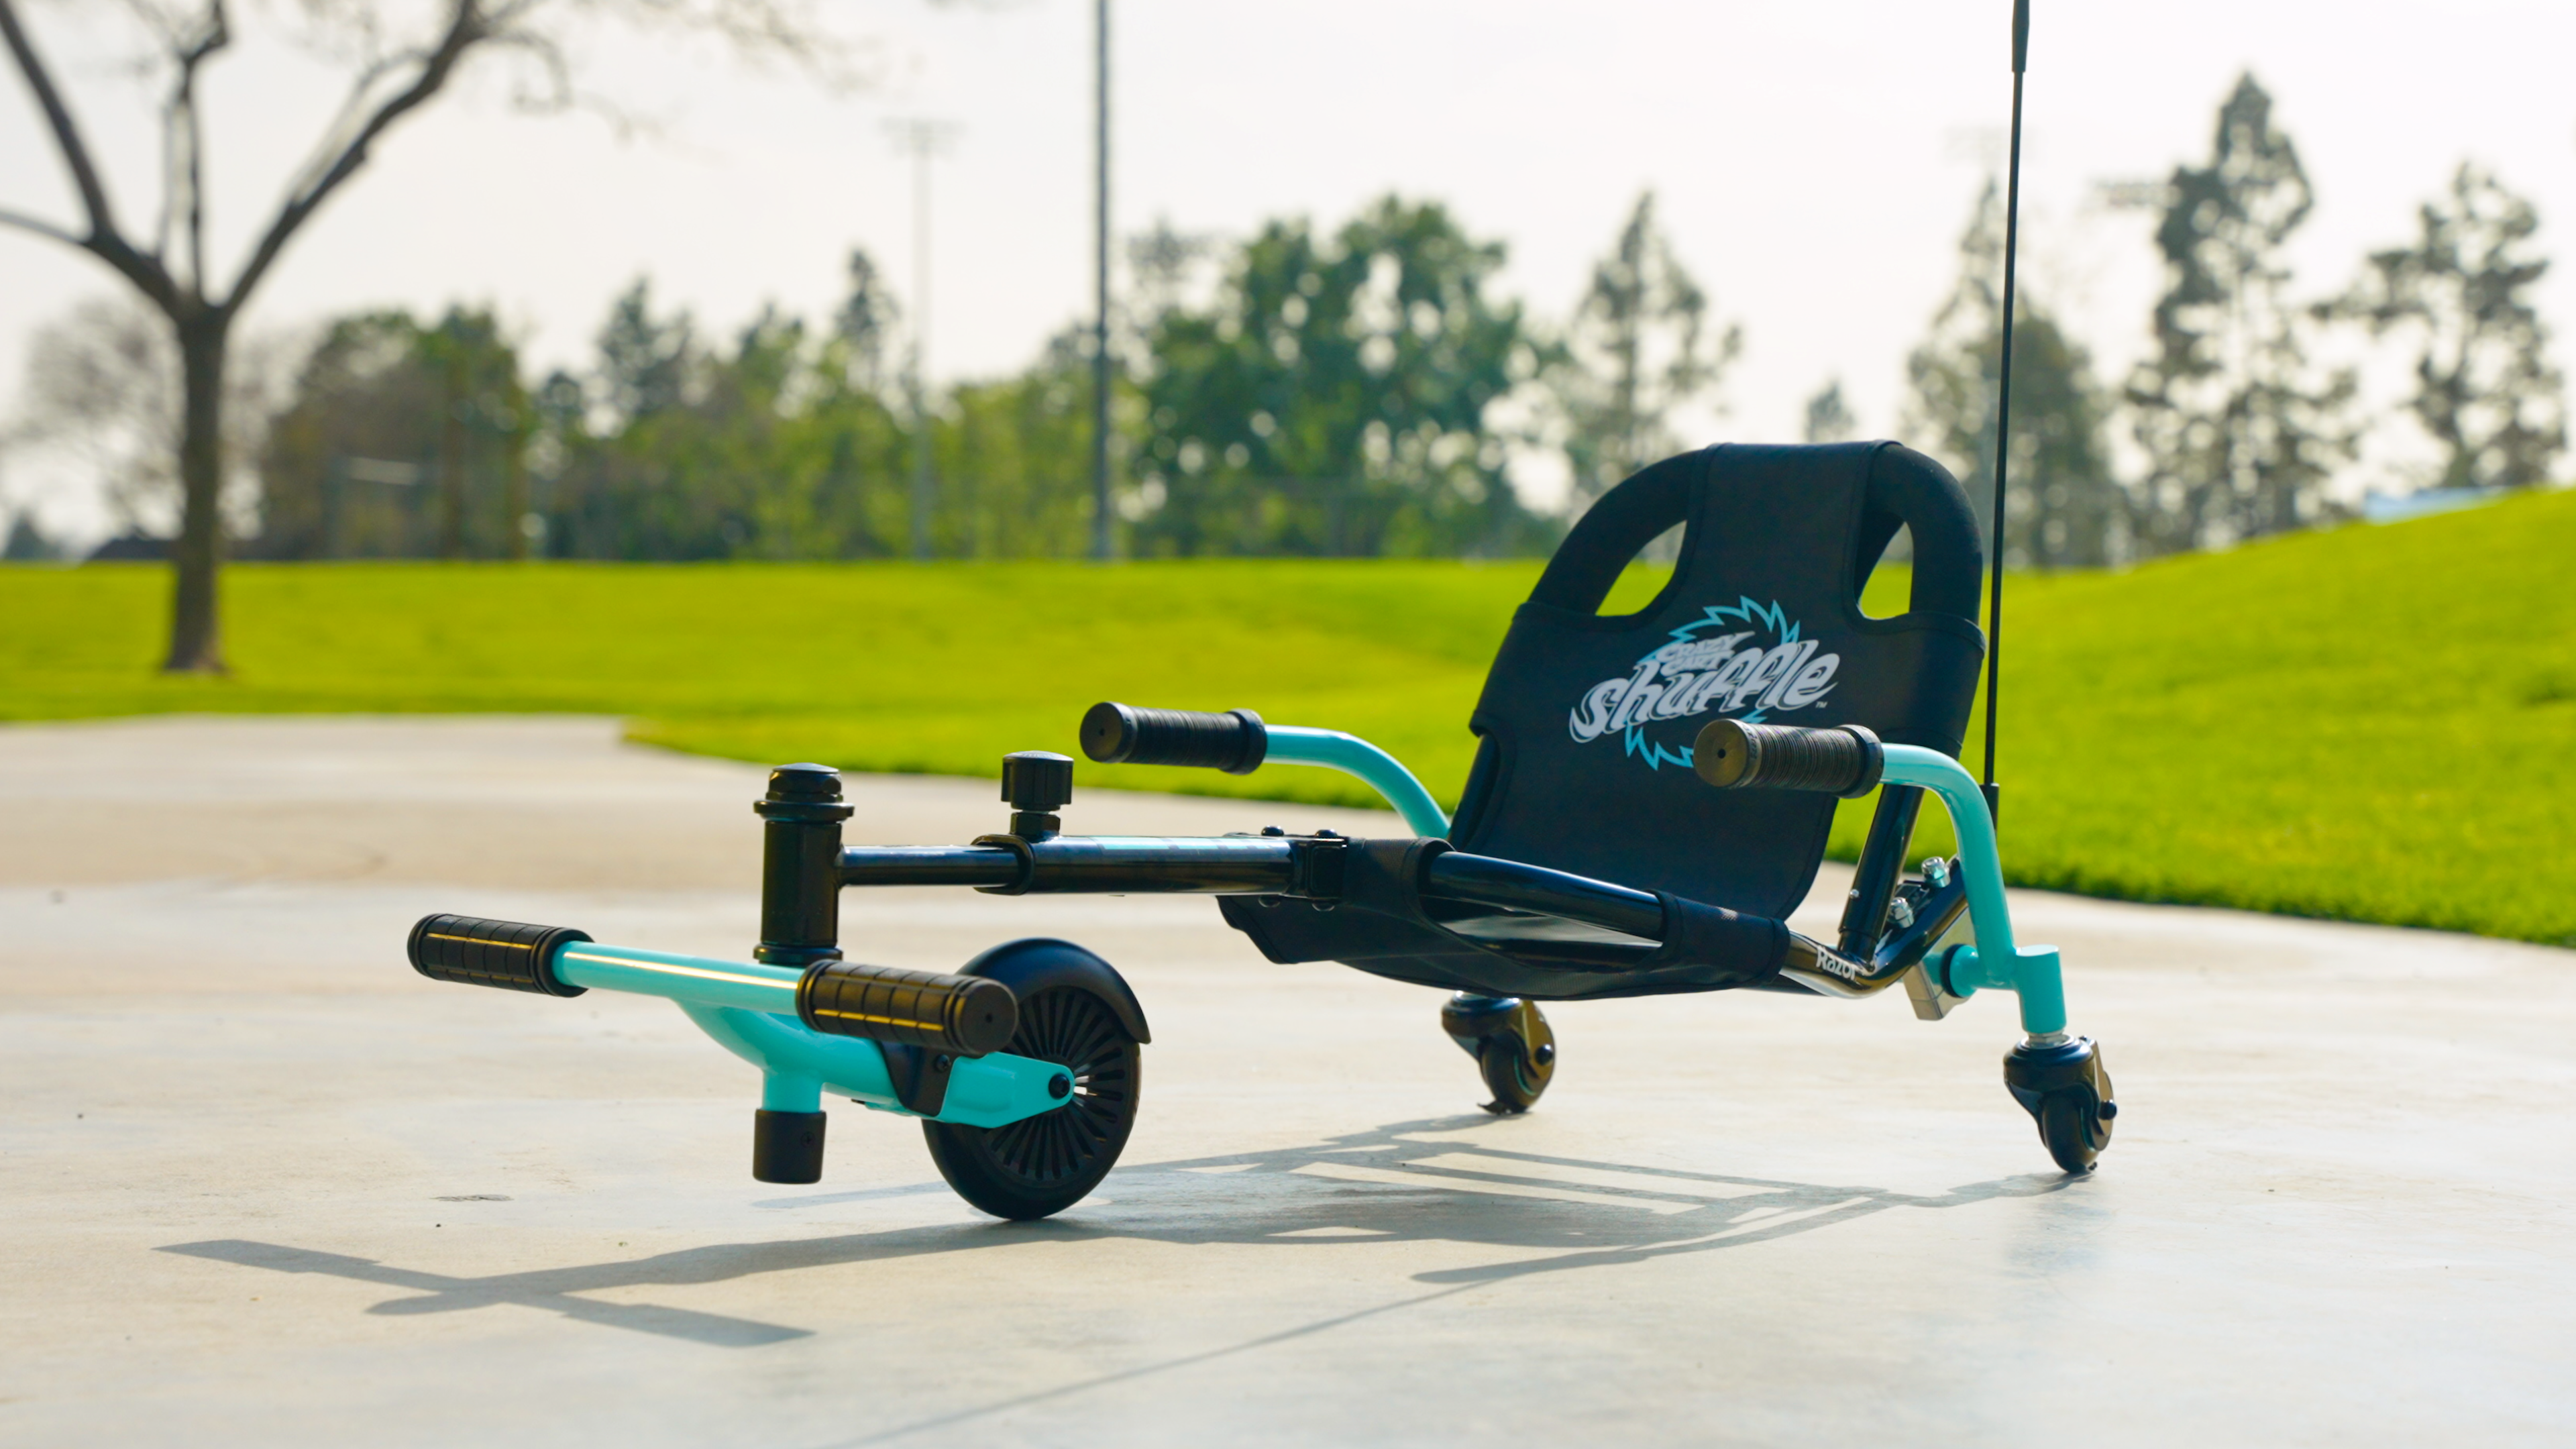 Hands on with the Crazy Cart XL drifting go-cart